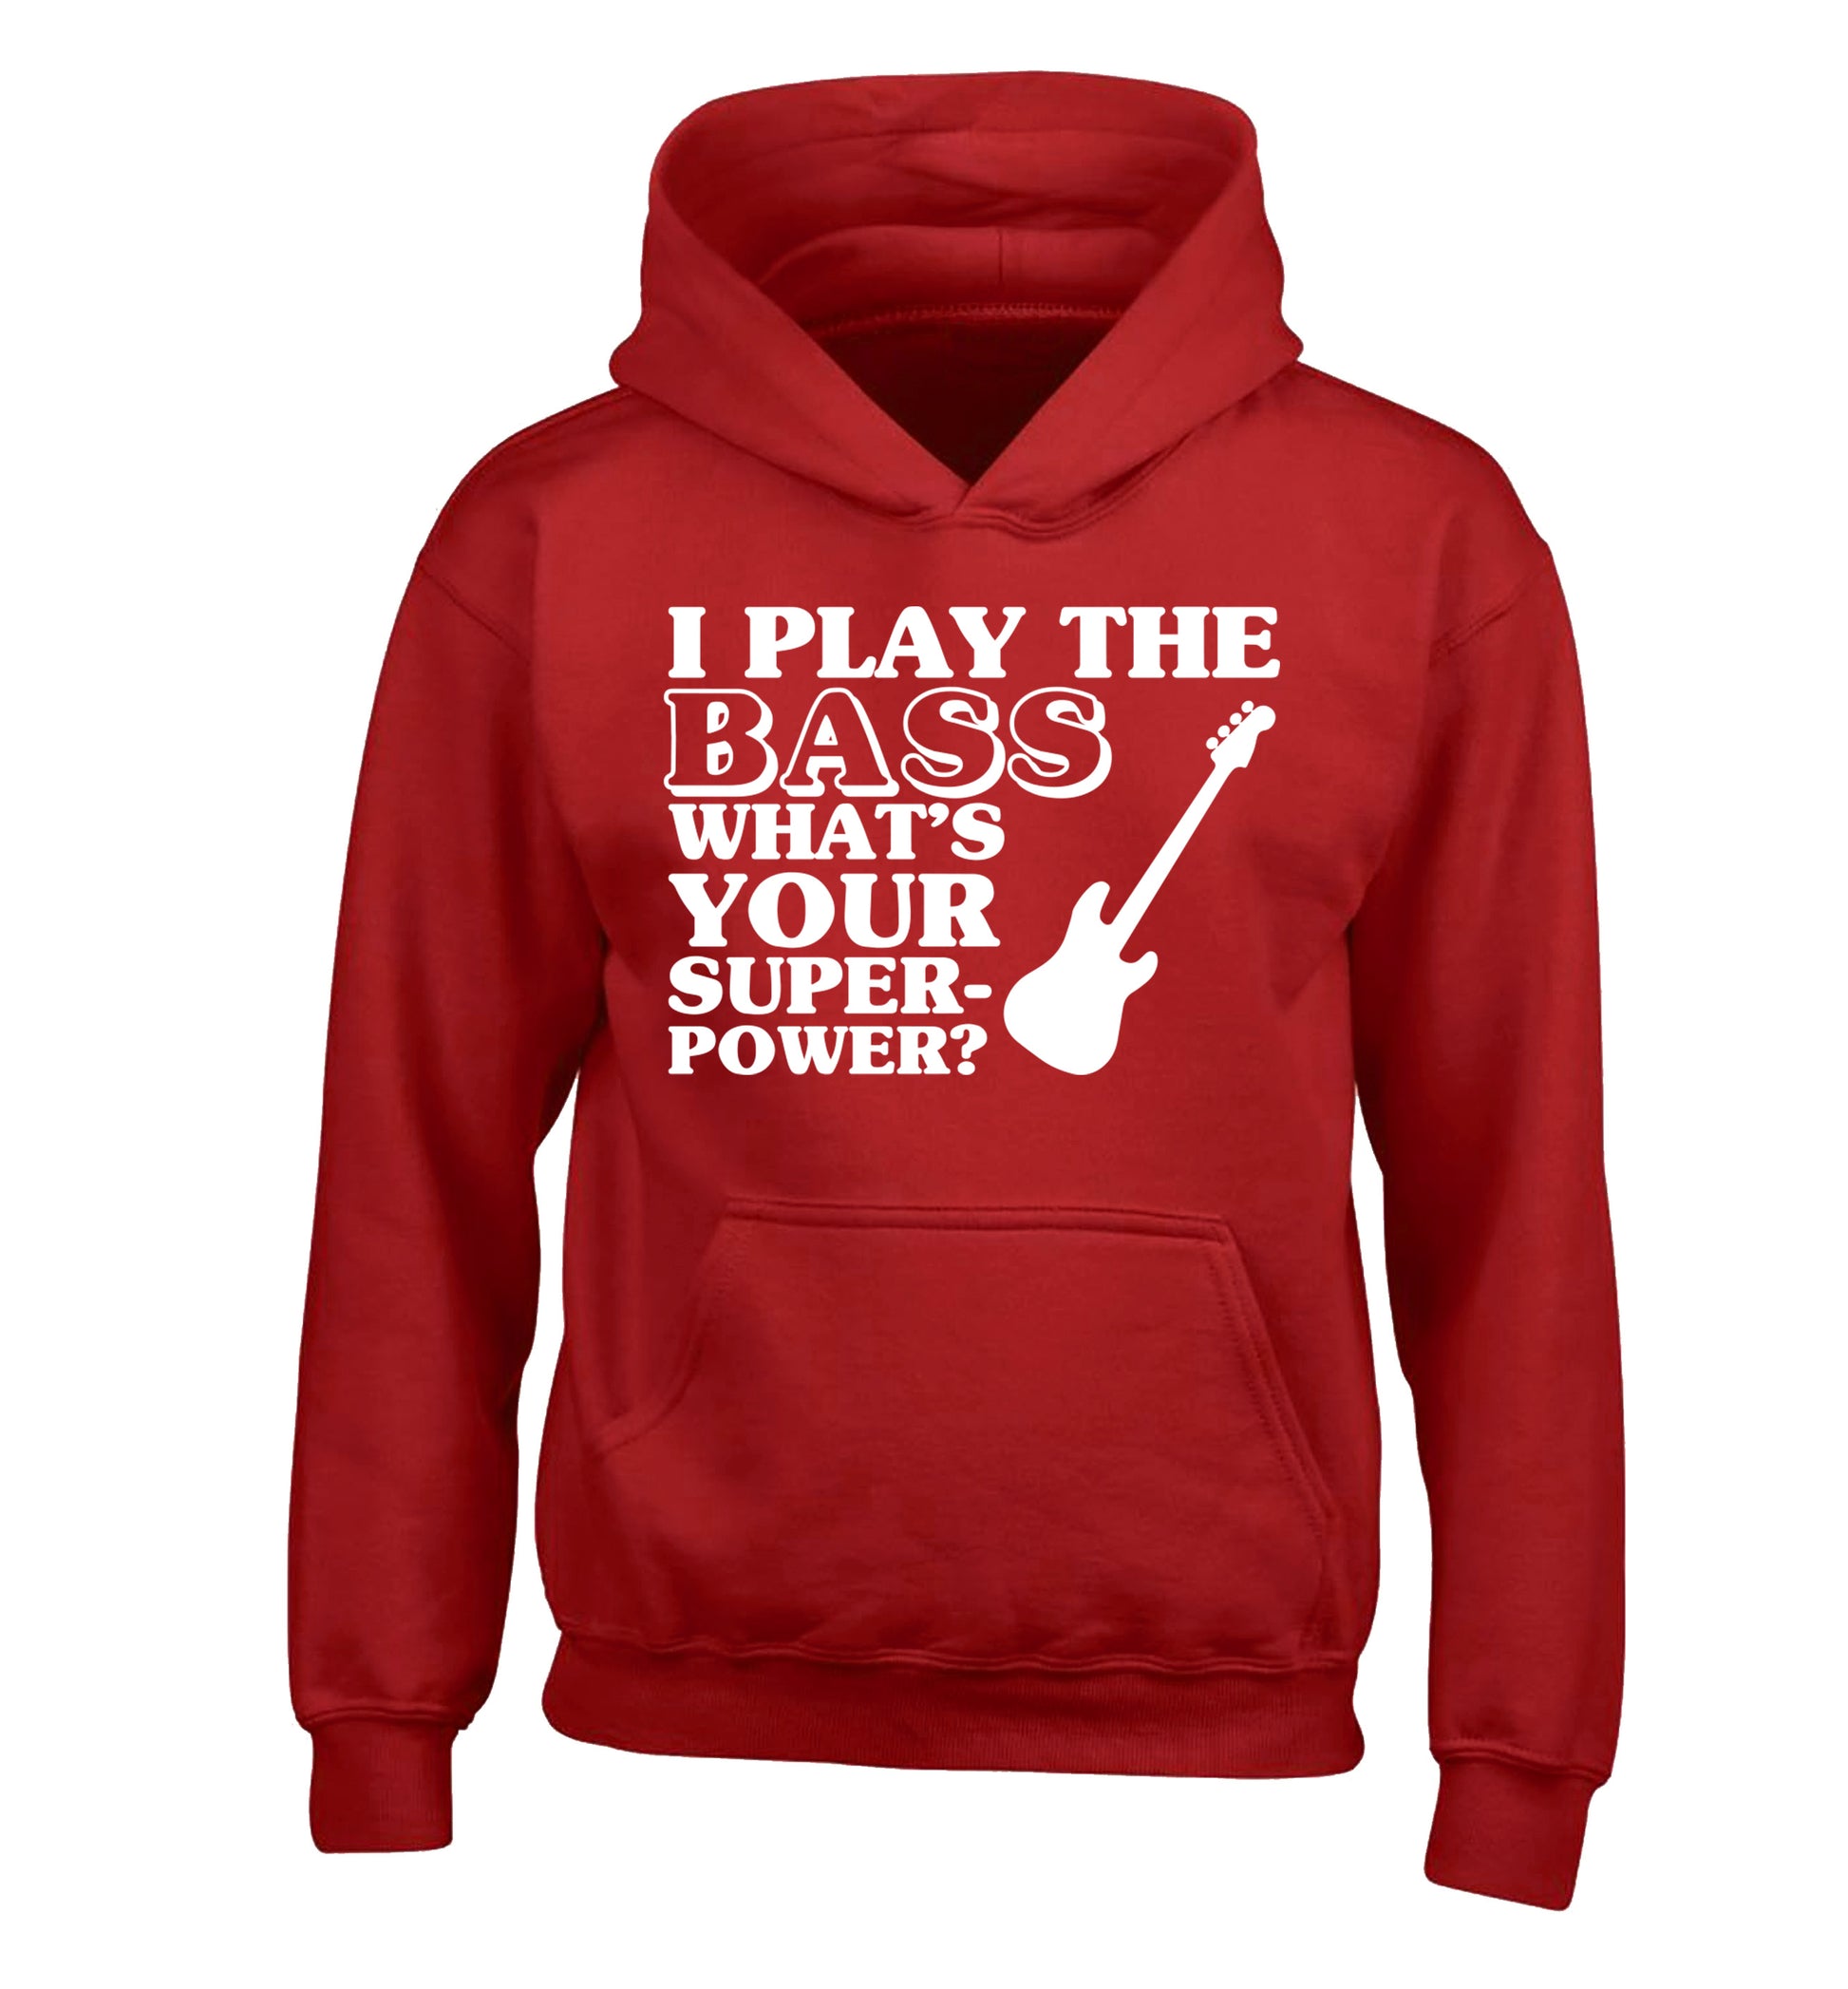 I play the bass what's your superpower? children's red hoodie 12-14 Years